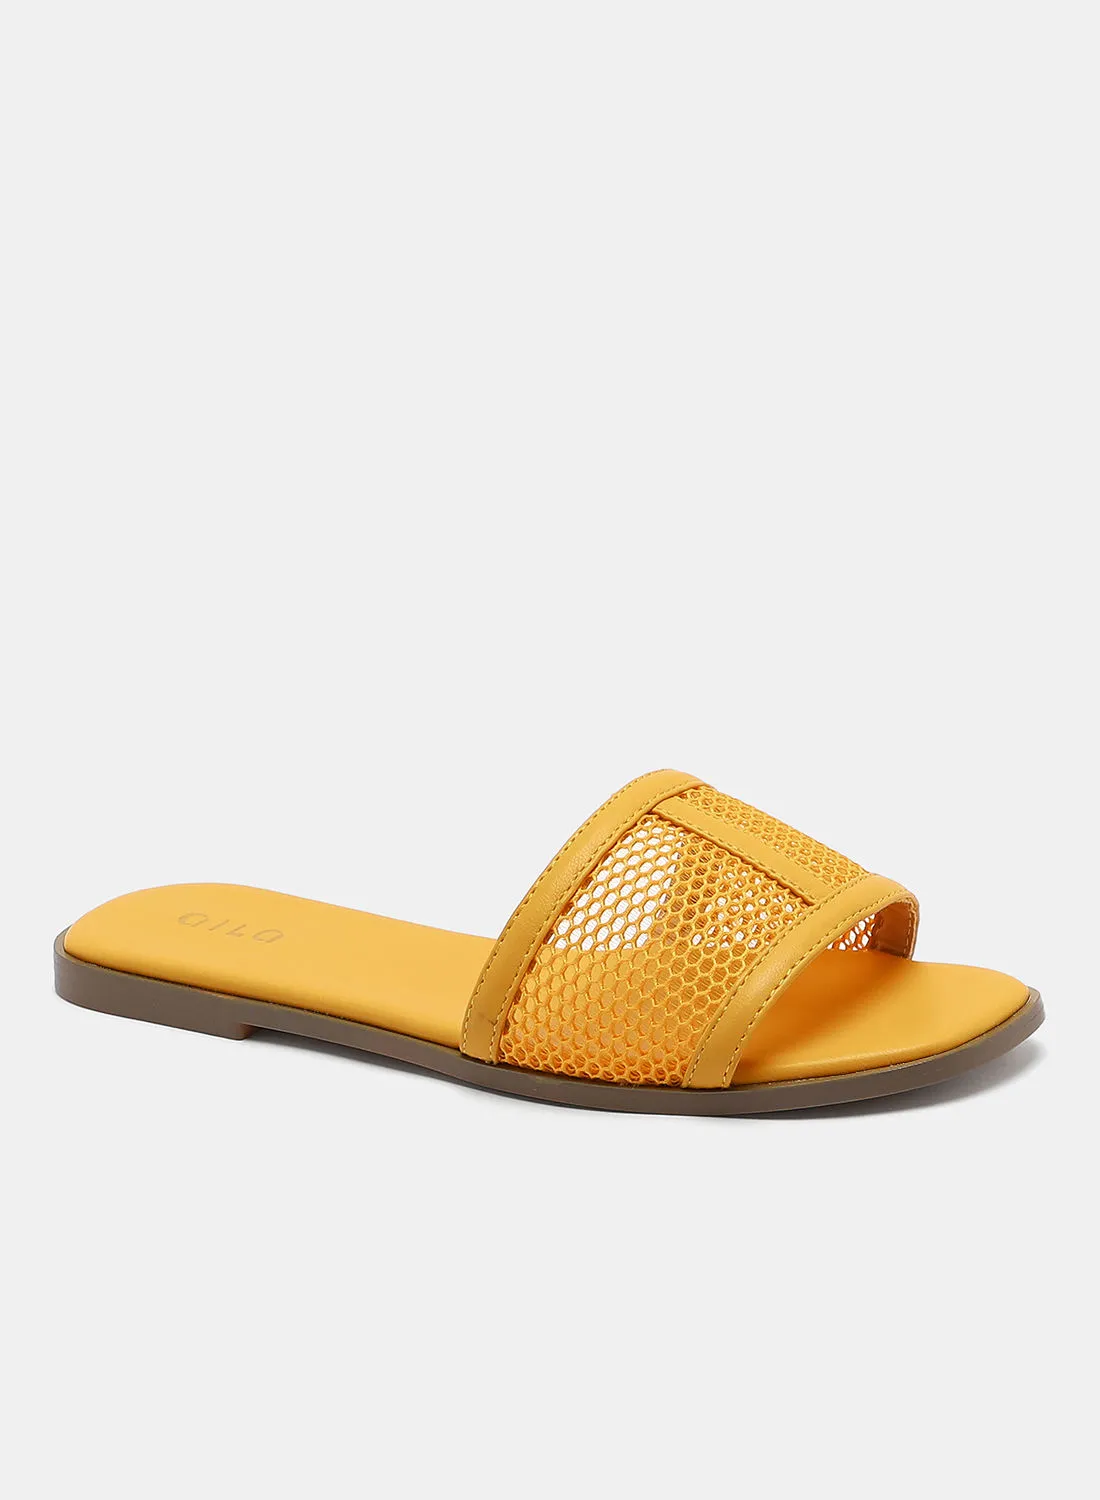 Aila Fashionable Casual Flat Sandals Yellow